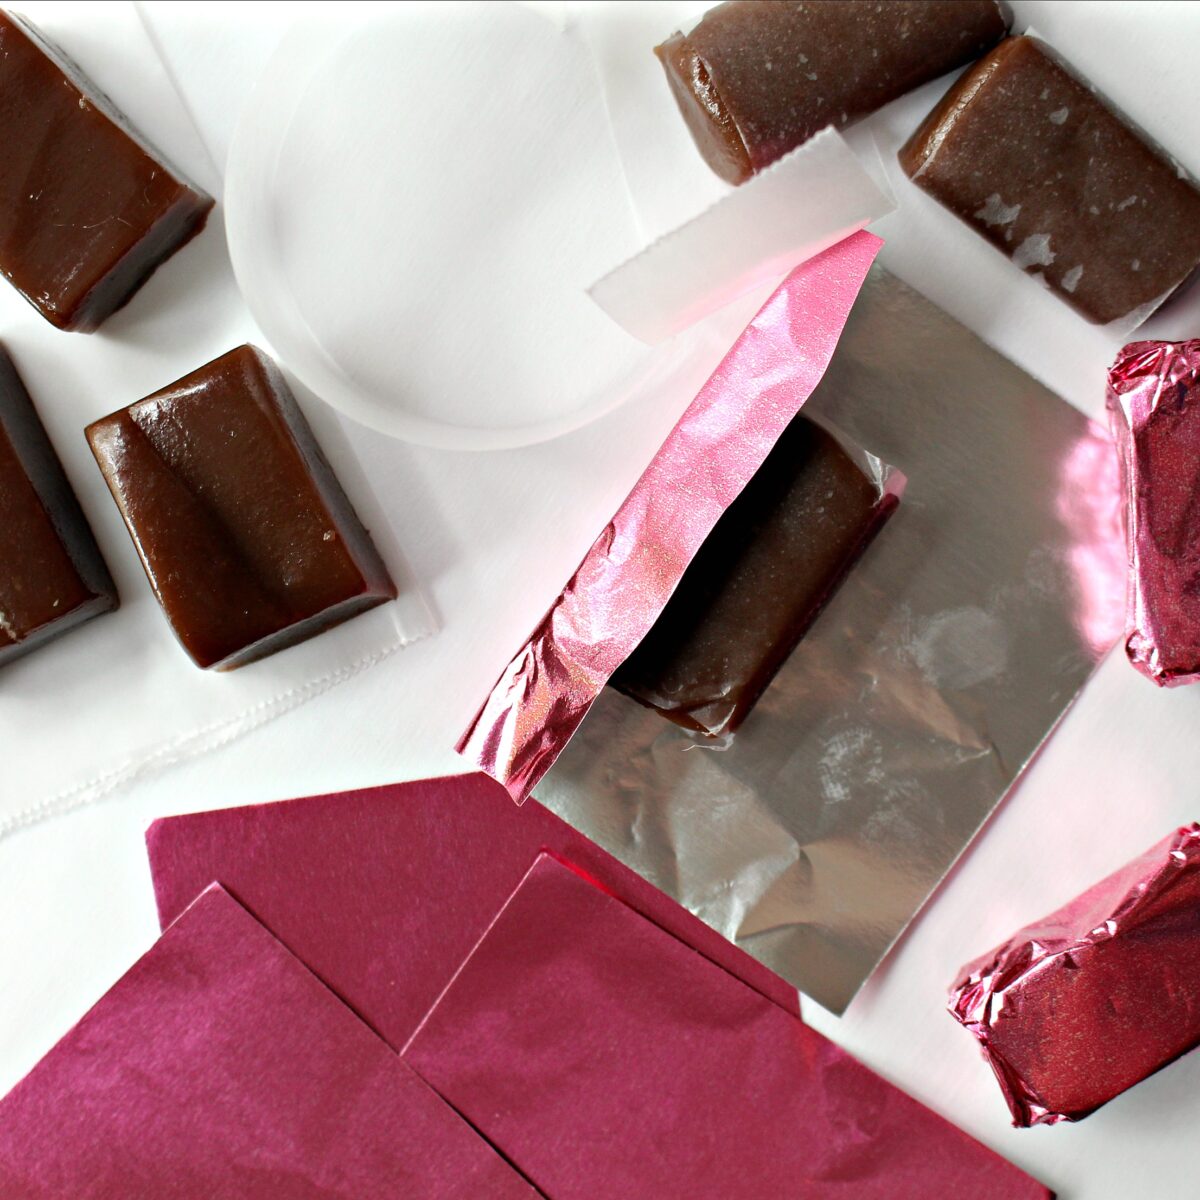 Caramels wrapped in wax paper being wrapped in pink foil.